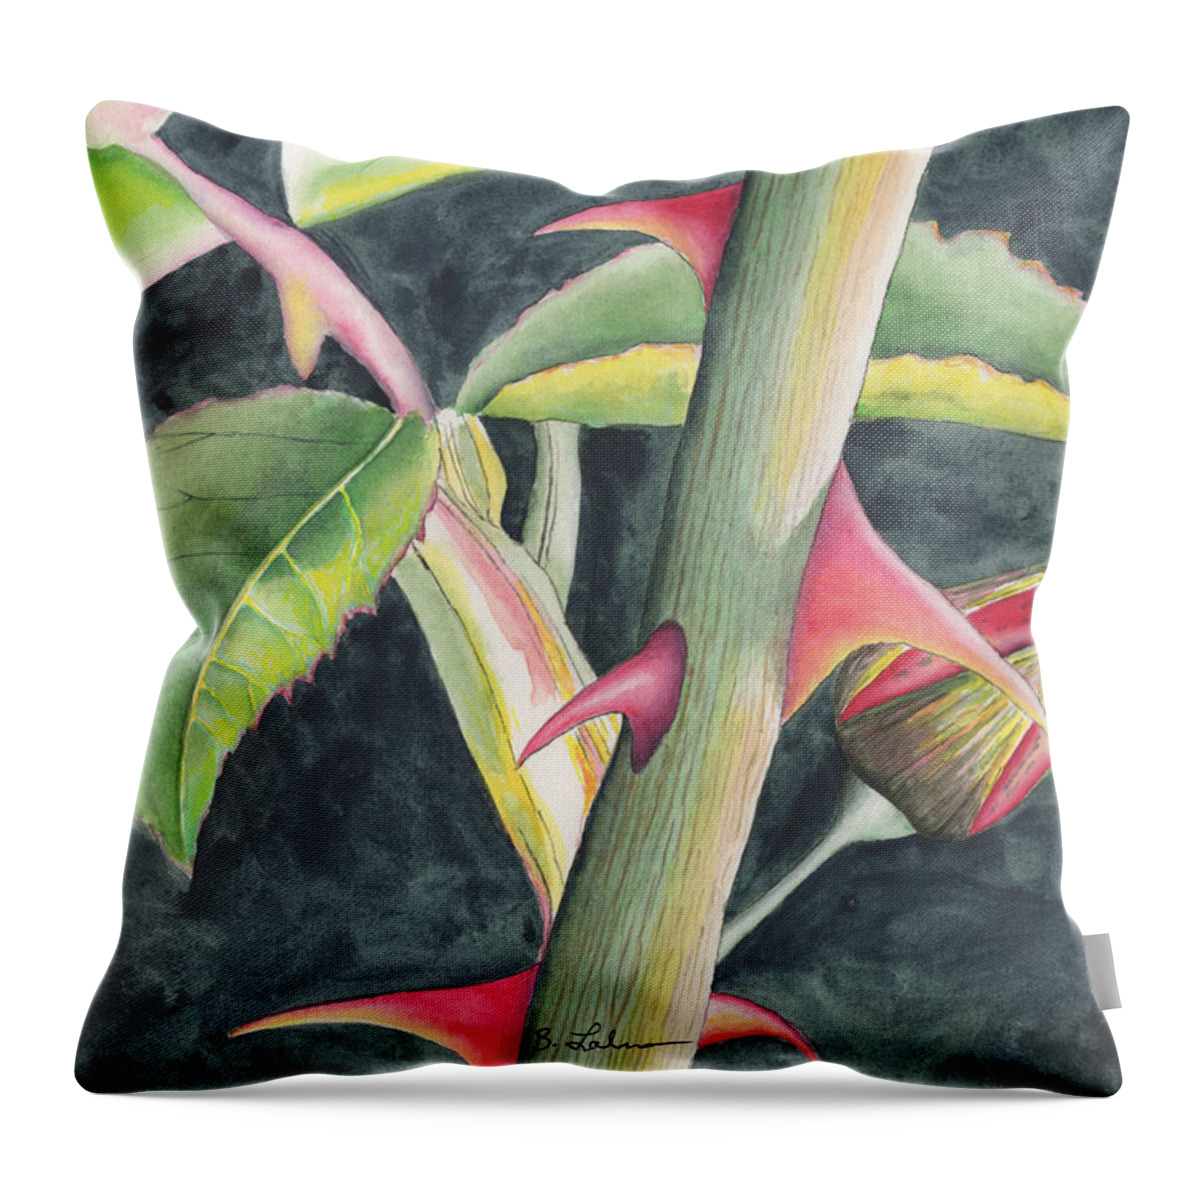 Rose Throw Pillow featuring the painting Among the Thorns by Bob Labno